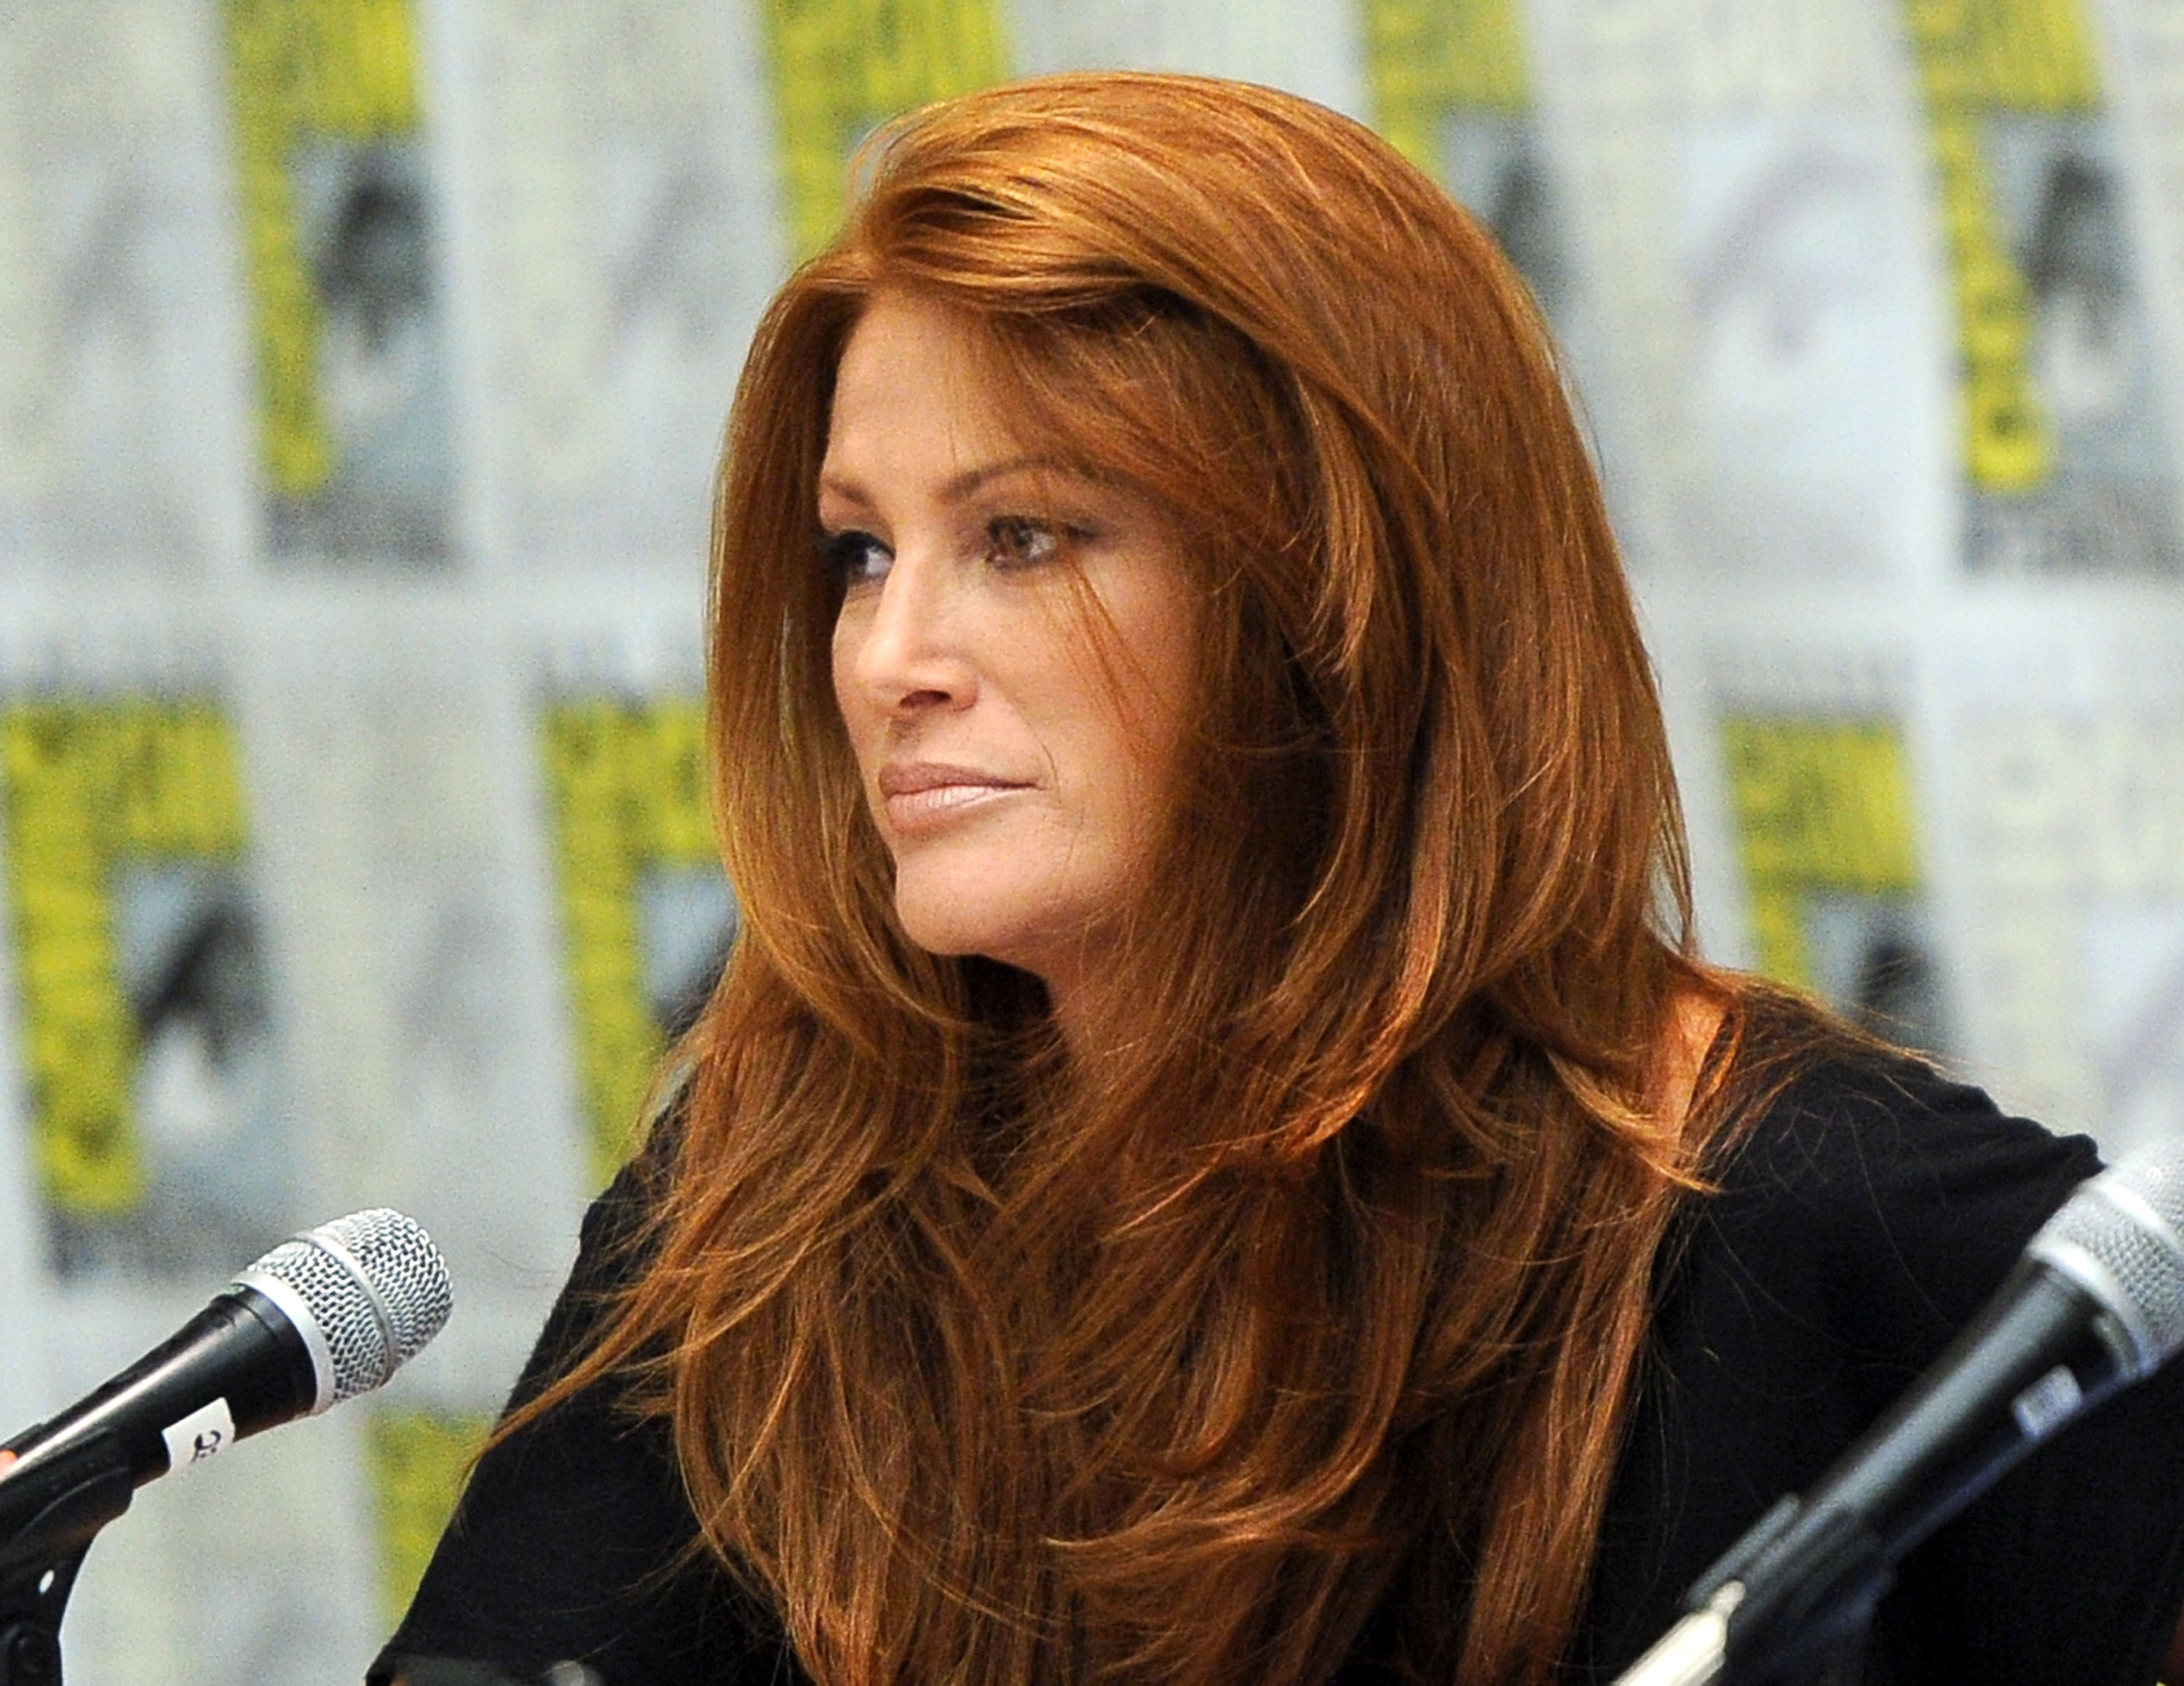 Angie Everhart cancer: The actress and former model will undergo surgery on...